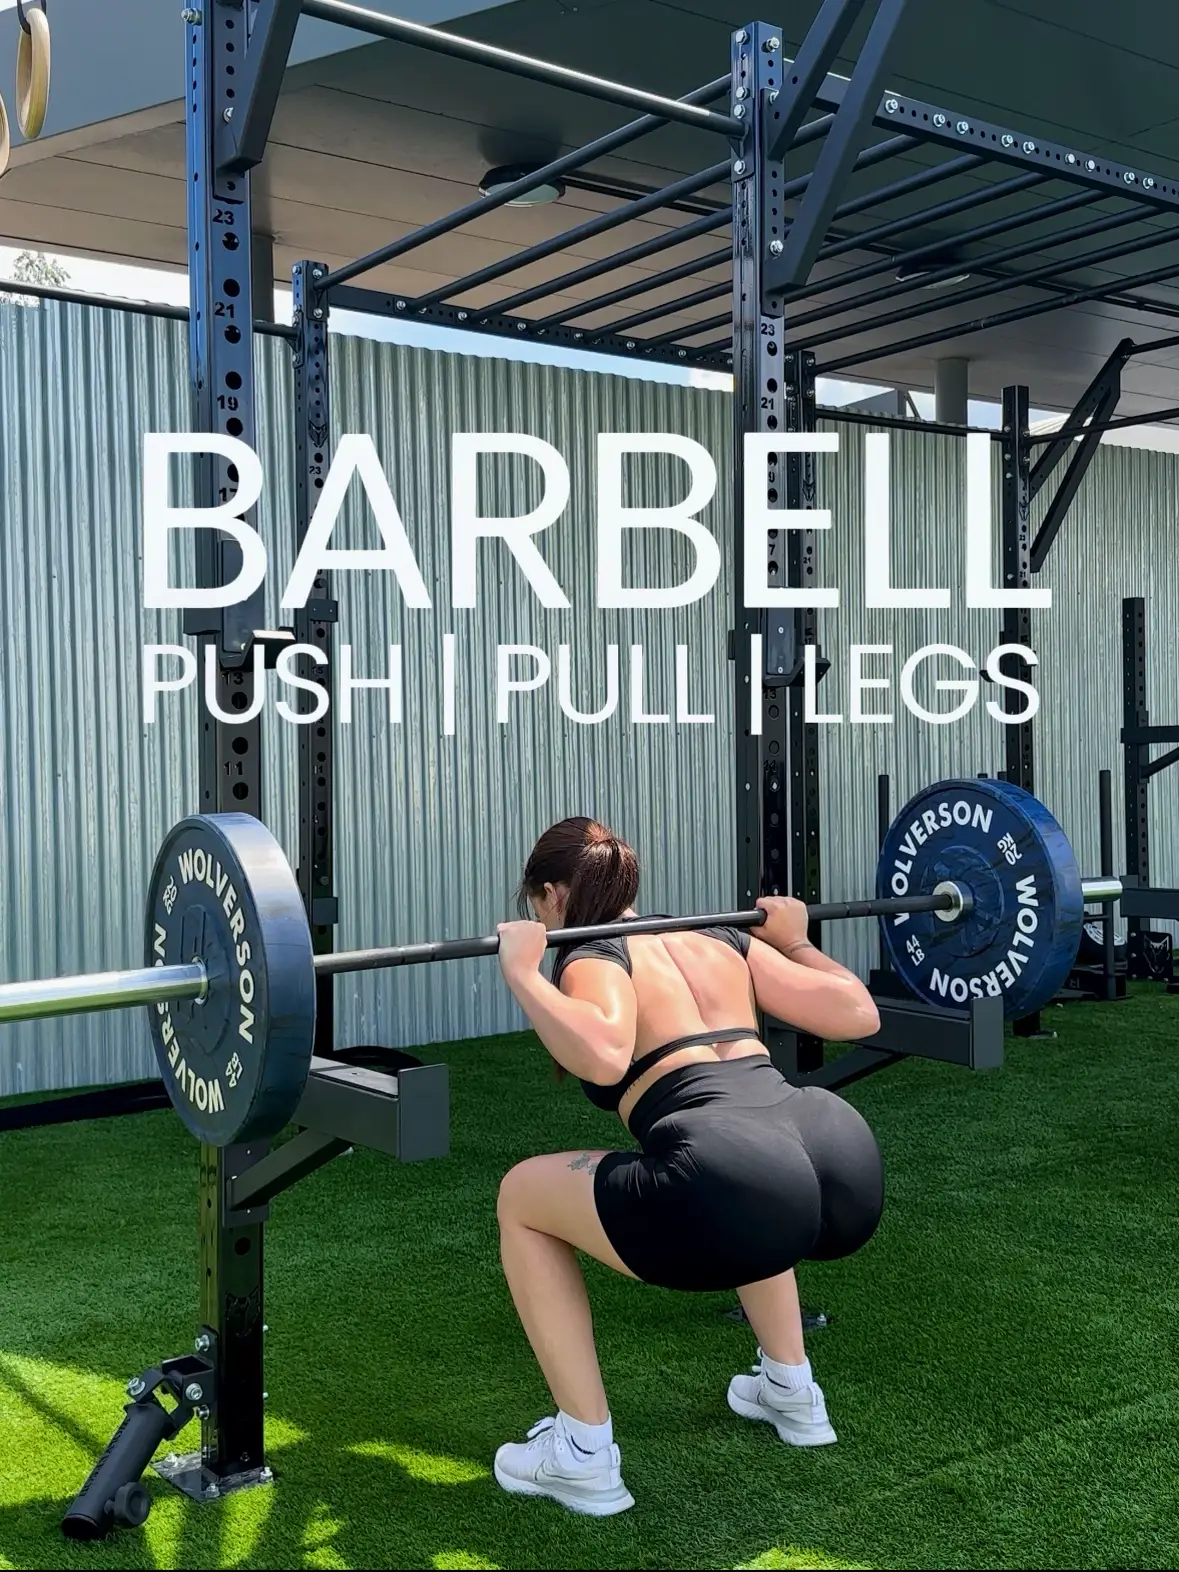 Should You Use A Barbell Pad?